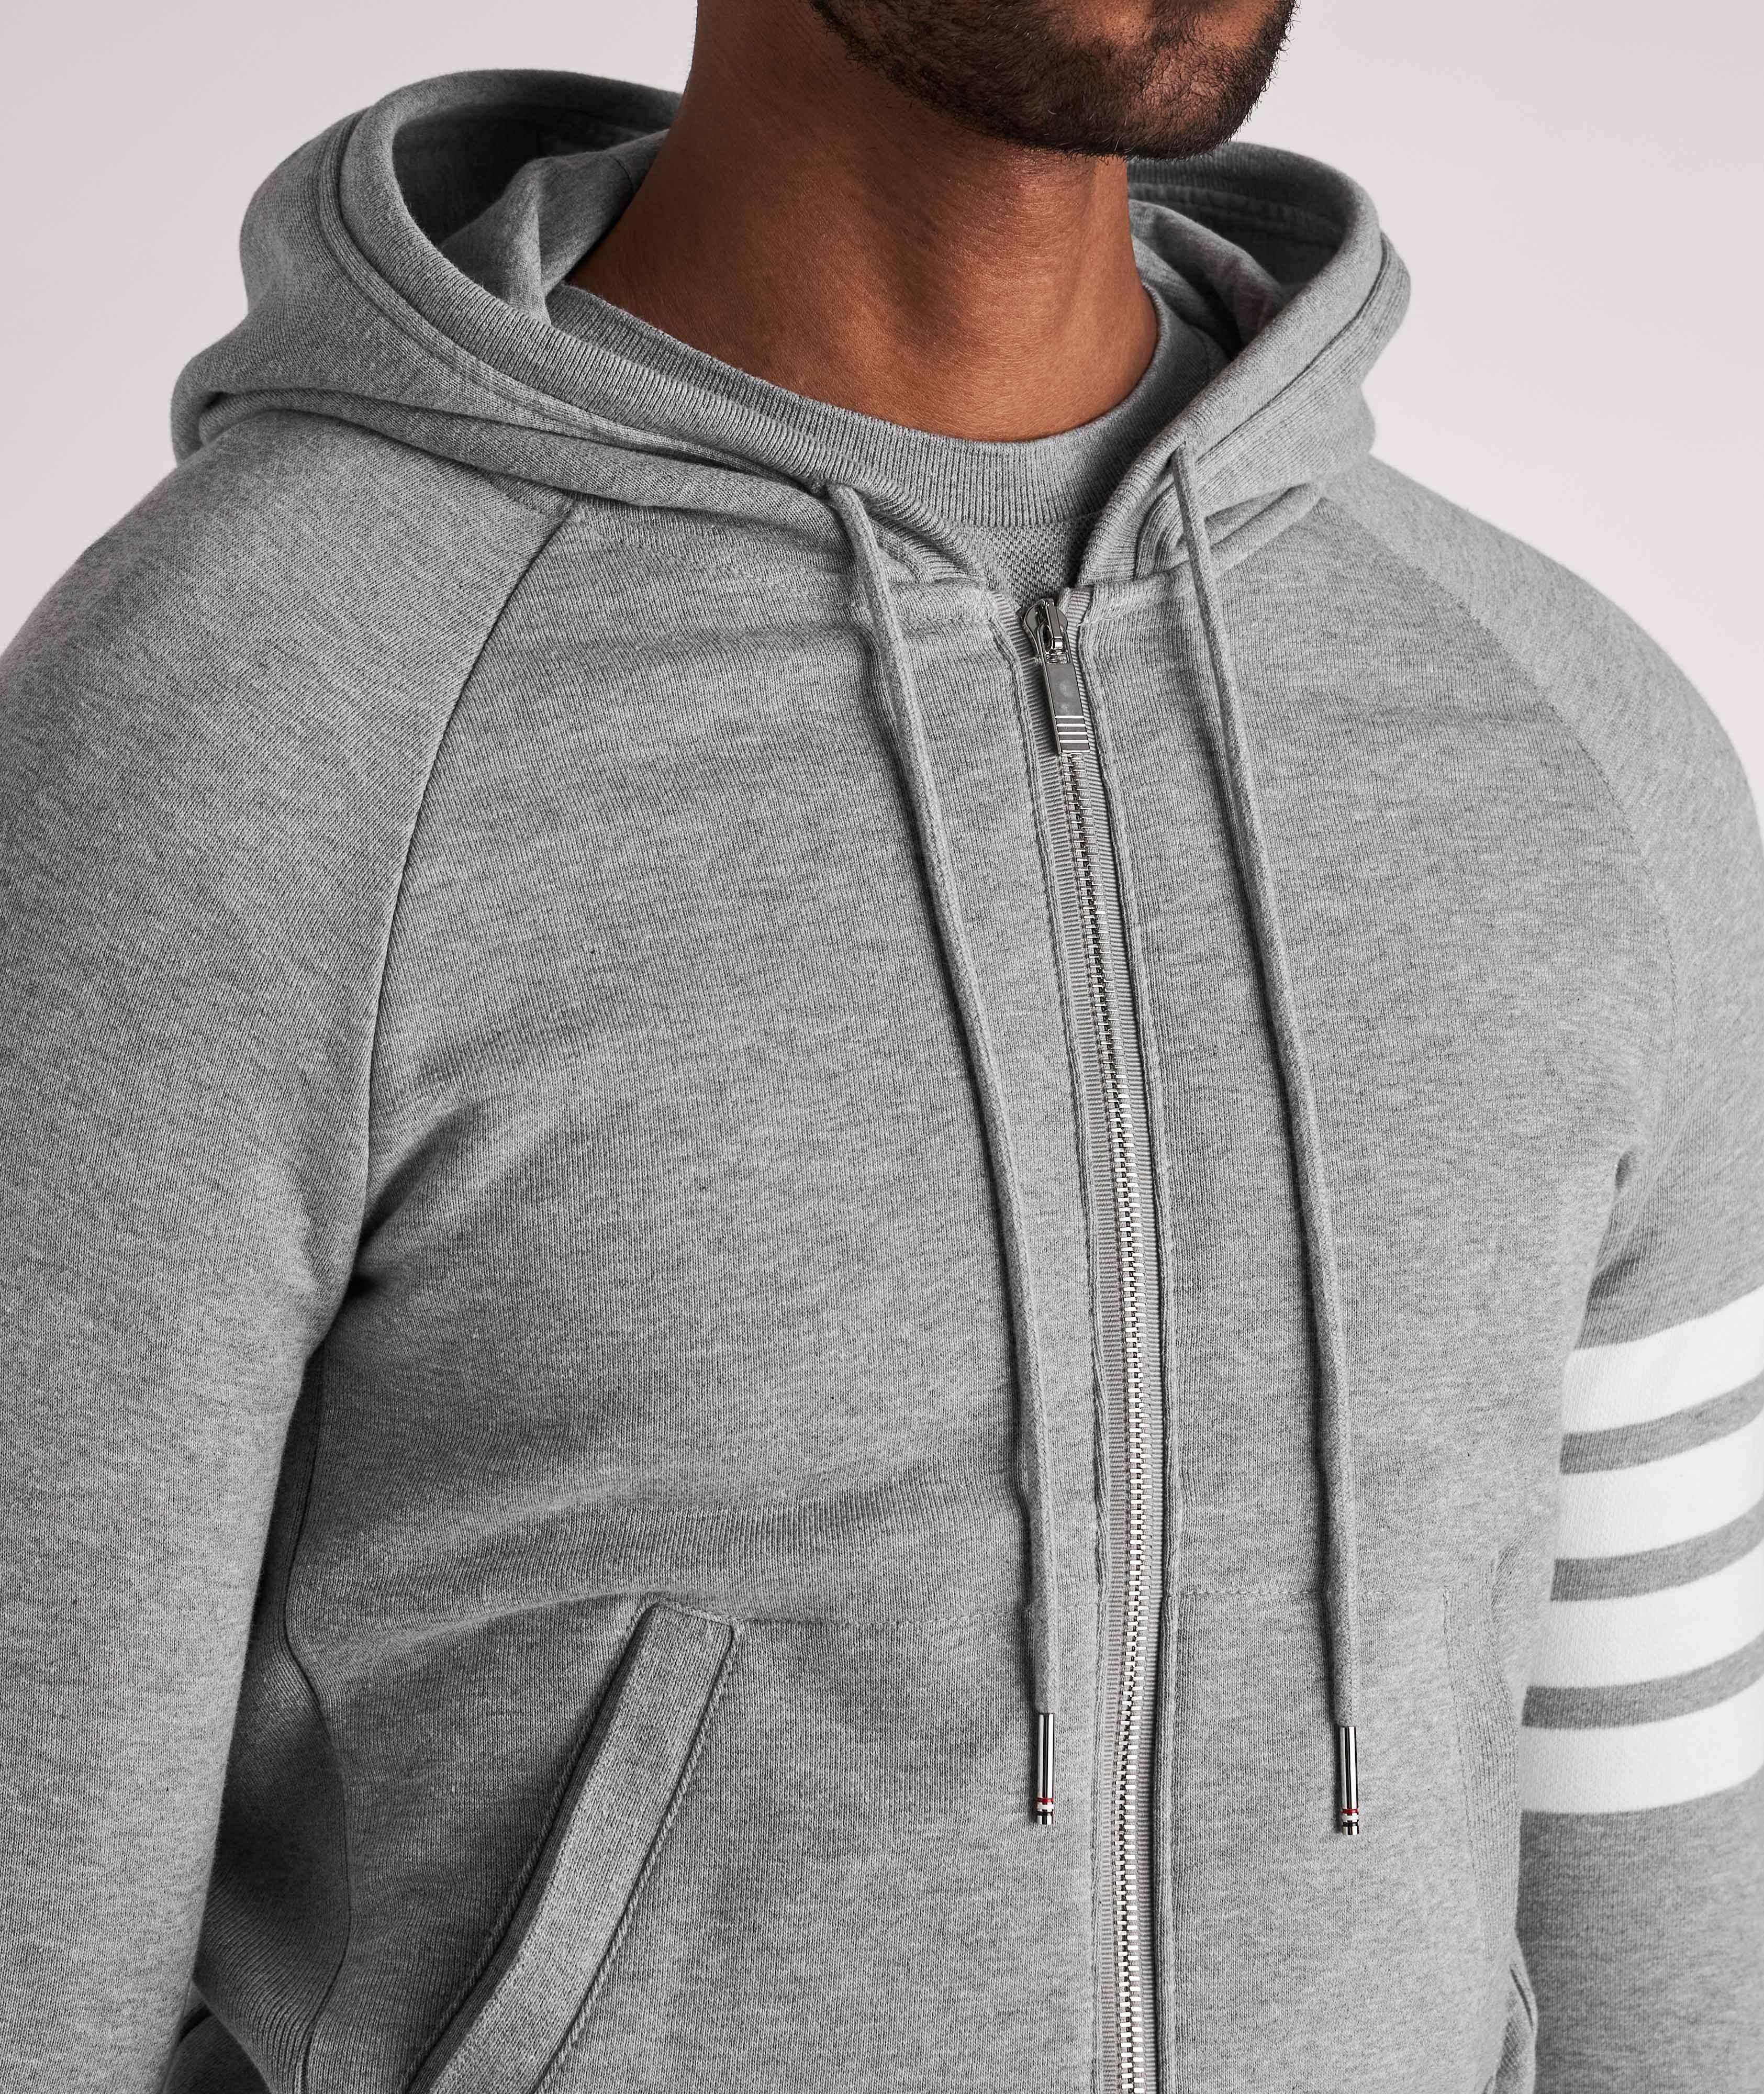 Four-Bar Stripe Zip-Up Cotton Hooded Sweater image 4